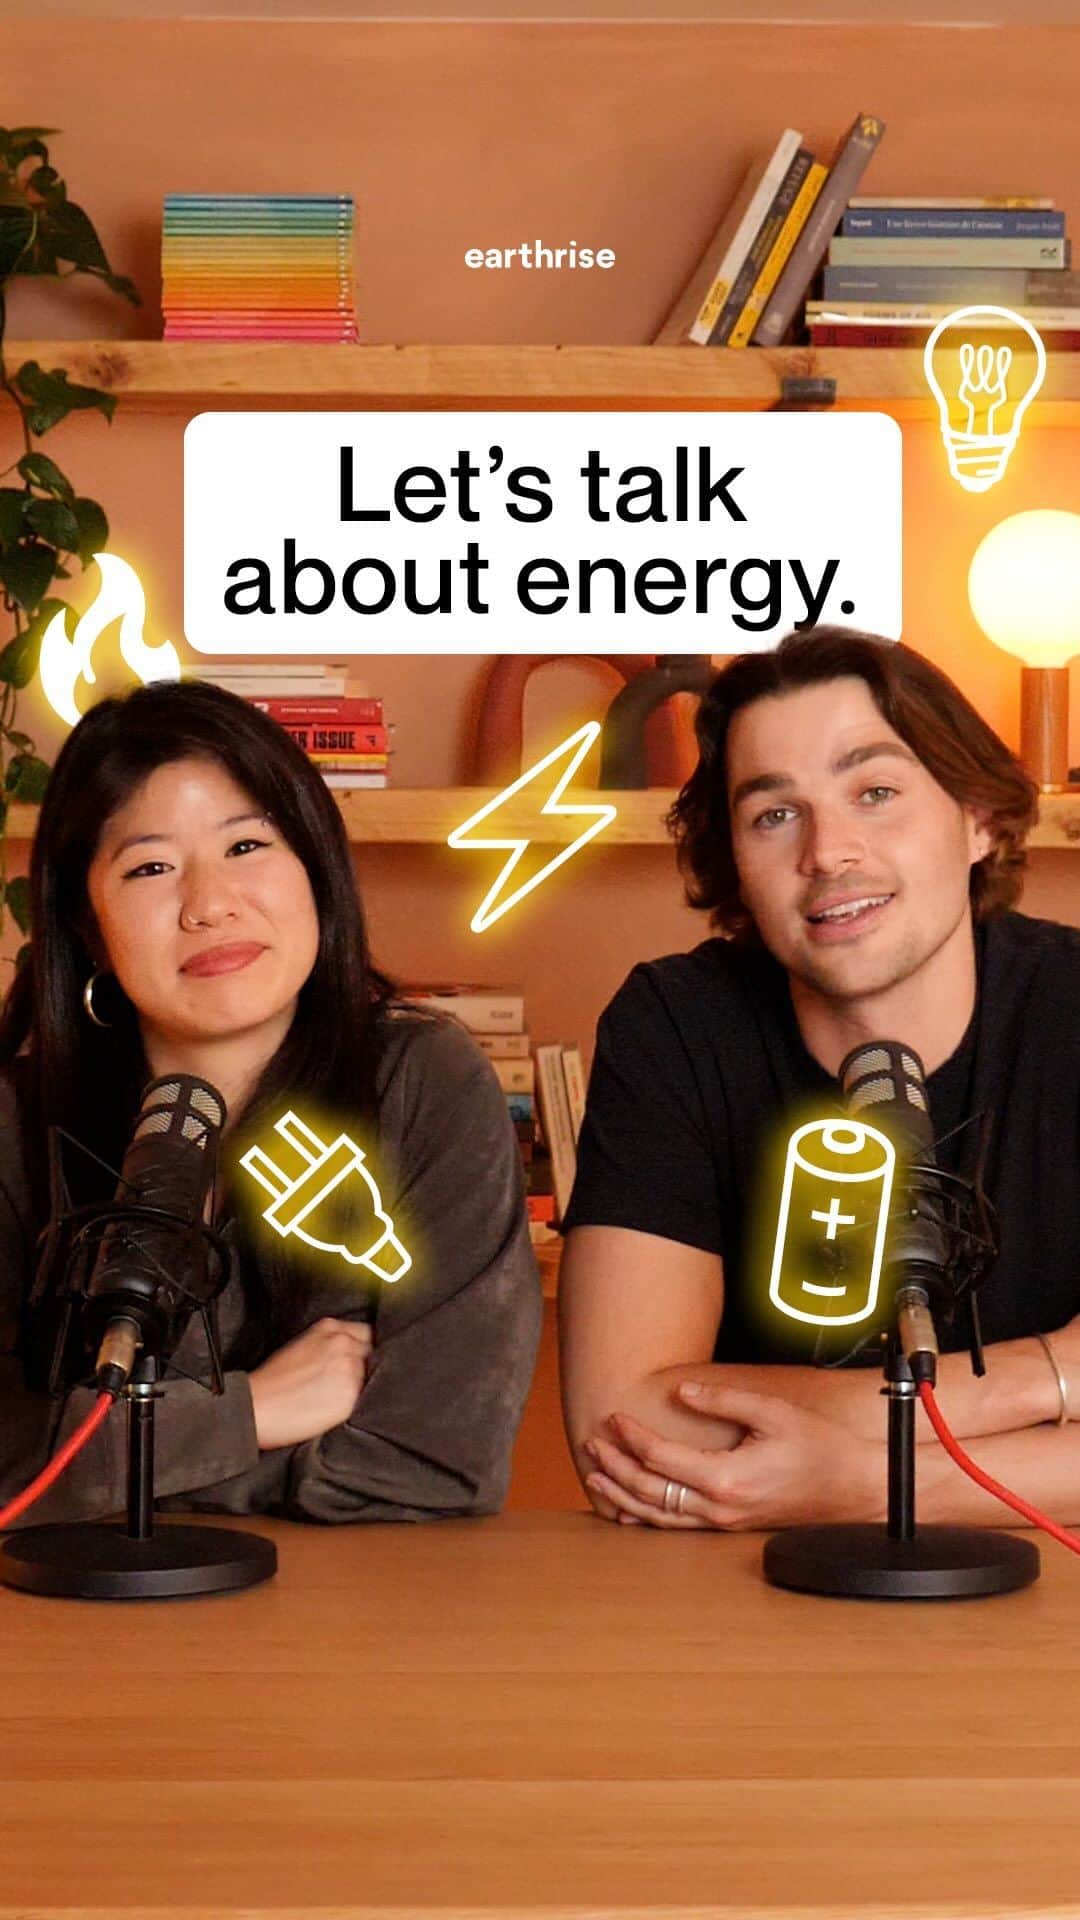 Jackson Harriesのインスタグラム：「I had a lot of fun making this video with @joixlee. Guys we need you’re help!! ⚡️🔋💡🔌🔥  We’re starting a new 4-part series on the global energy crisis, but… we want to cover questions and topics that are interesting and relevant to YOU.  It could be questions ranging from: Why are our gas bills going up? What does Russia have to do with it? How does it impact different communities?  Or it could be topics that you’ve noticed around you: how it impacts a certain community in a different way, an inspiring innovation you’ve seen, or an unintended consequence it’s caused.  We want to hear it all. 💬 Comment below, 📩 DM us, or 📧 email us at stories@earthrise.studio.  And most importantly what electricity related puns did we miss?! ⚡️🤪🔋💡🔌 Comment below 👇🏼」